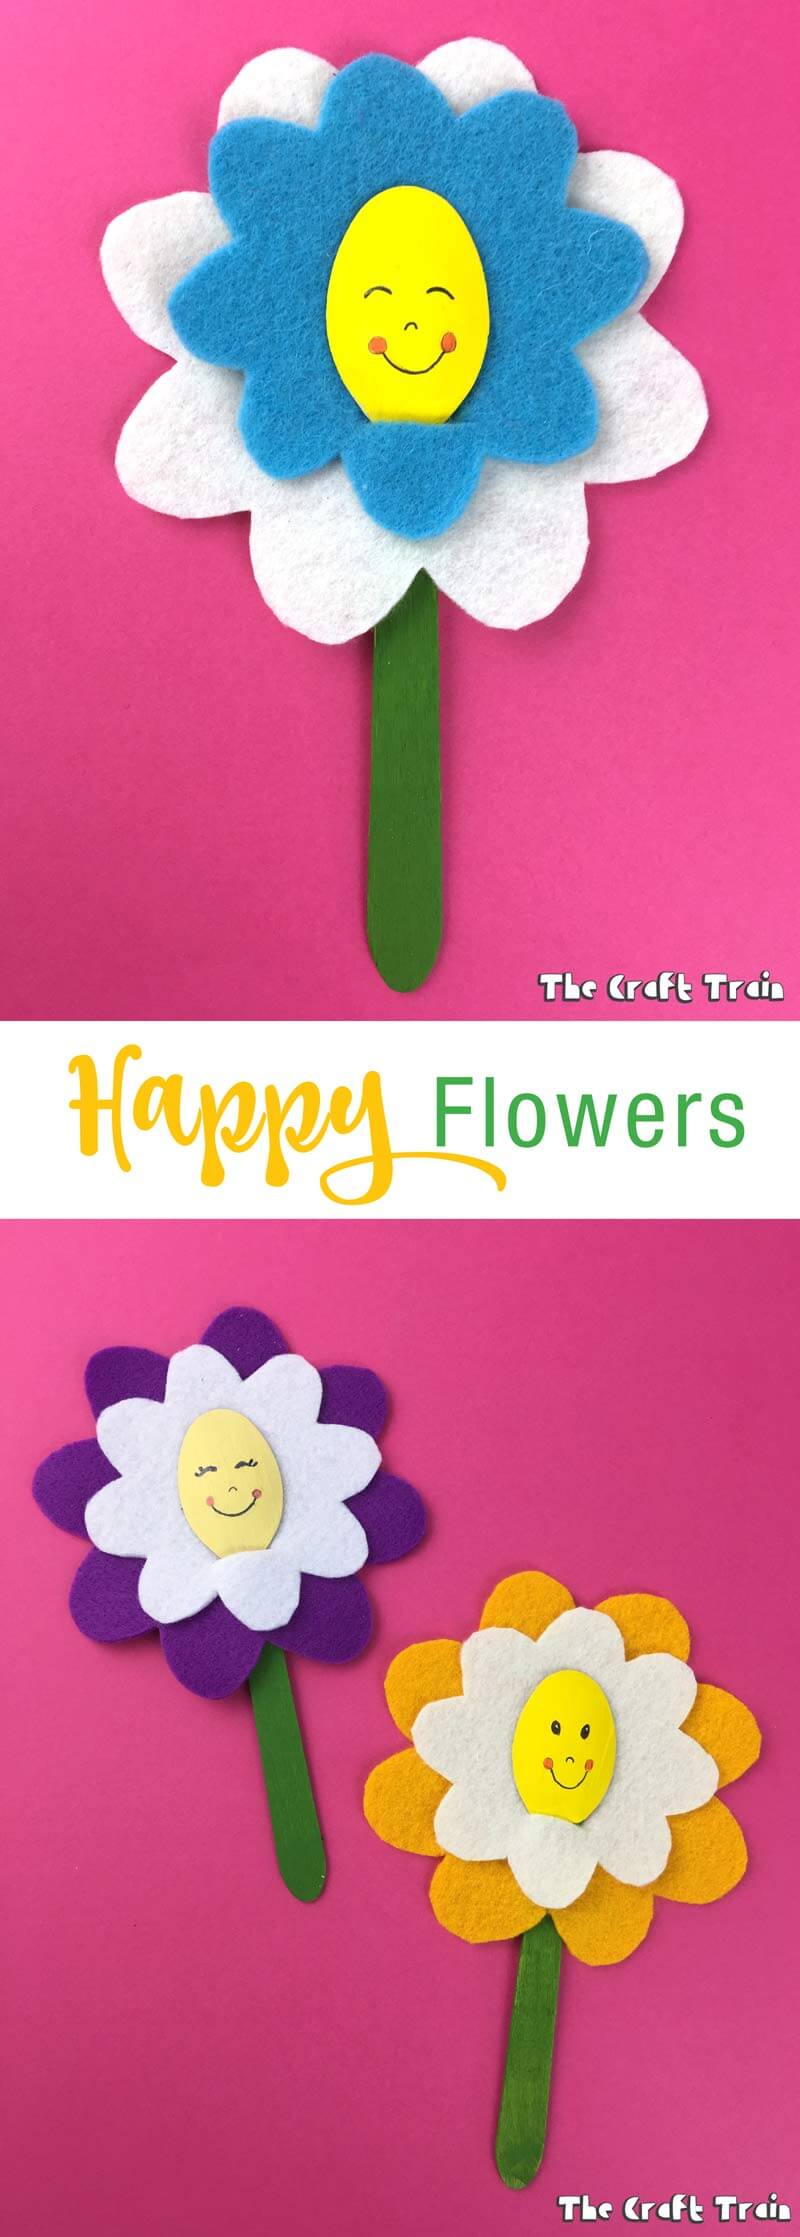 Happy flower craft idea for kids. Easy to make felt flower petals with a wooden spoon stem. This would make a sweet kid-made mothers day gift idea, and is a fun Spring craft idea for kids #flowercraft #springcraft #felt #spooncraft #mothersday